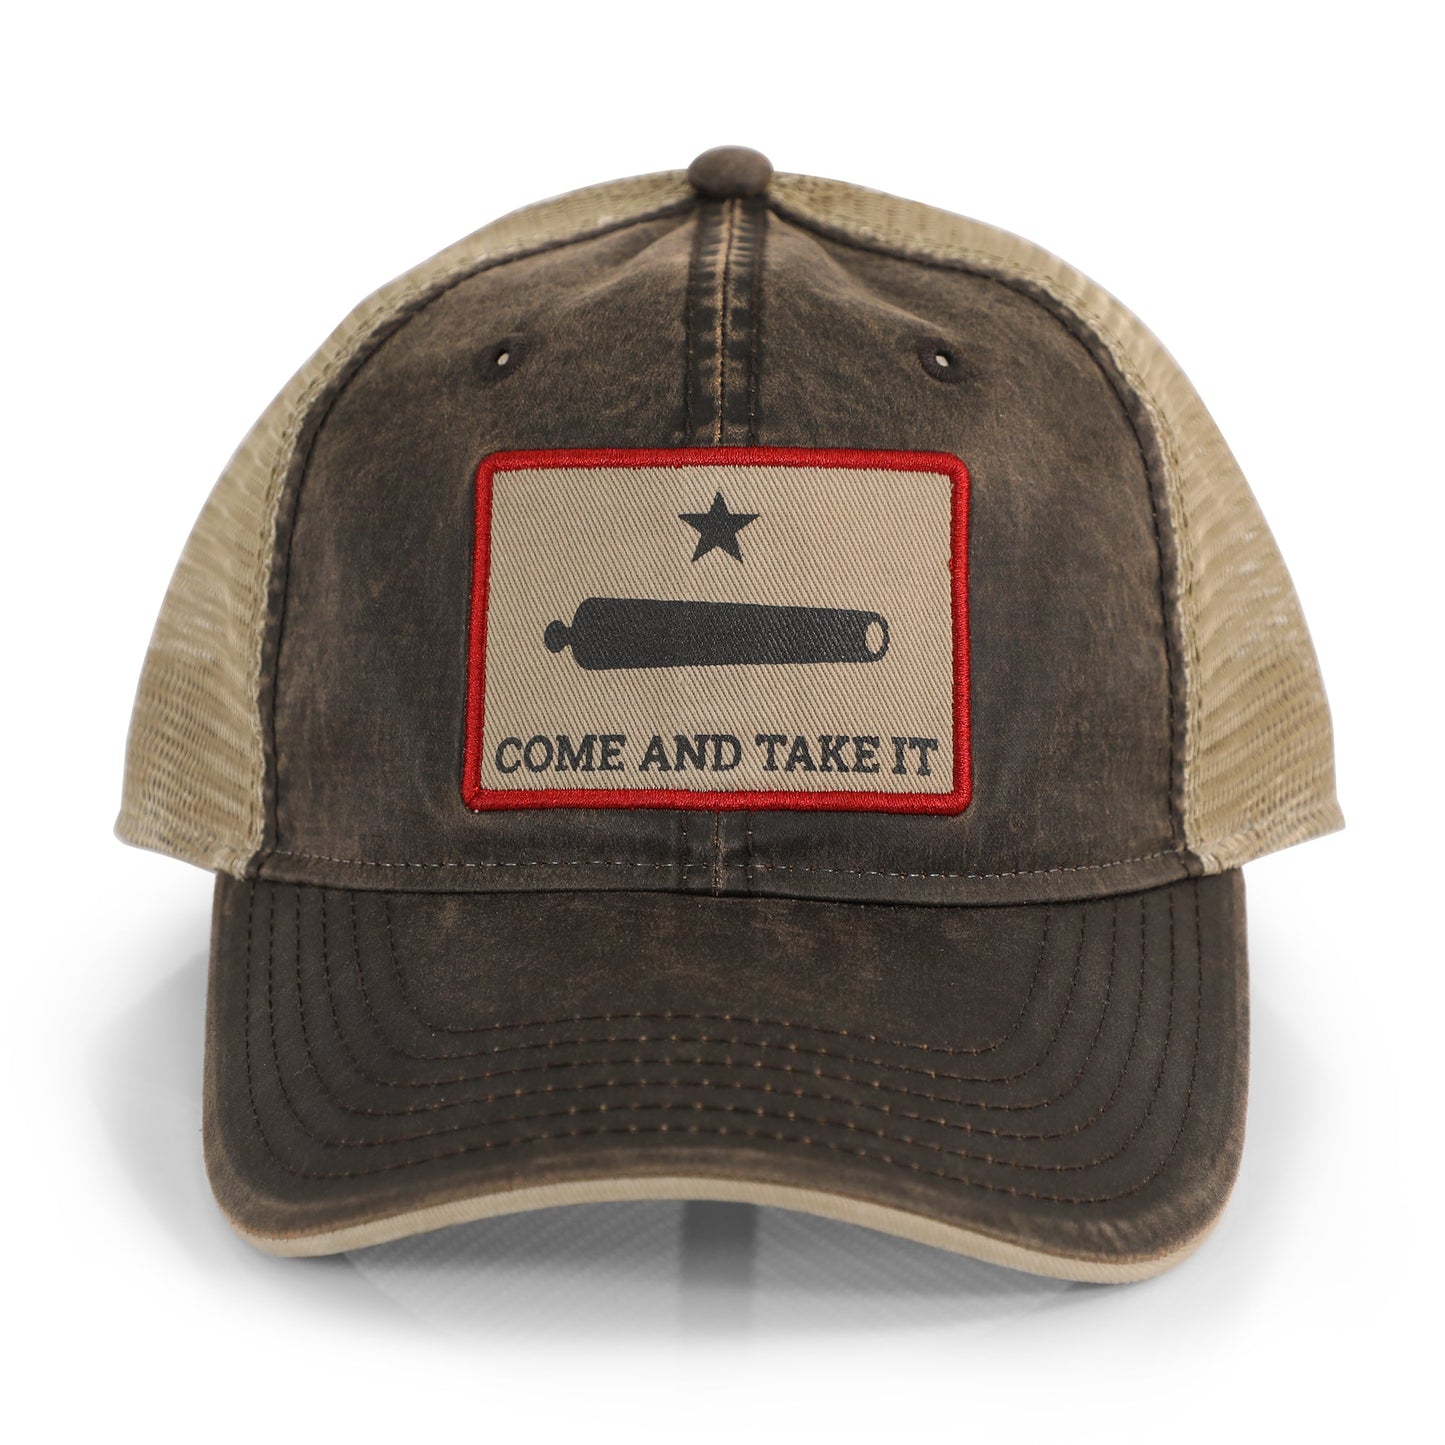 Come And Take It - Hats for Texans 